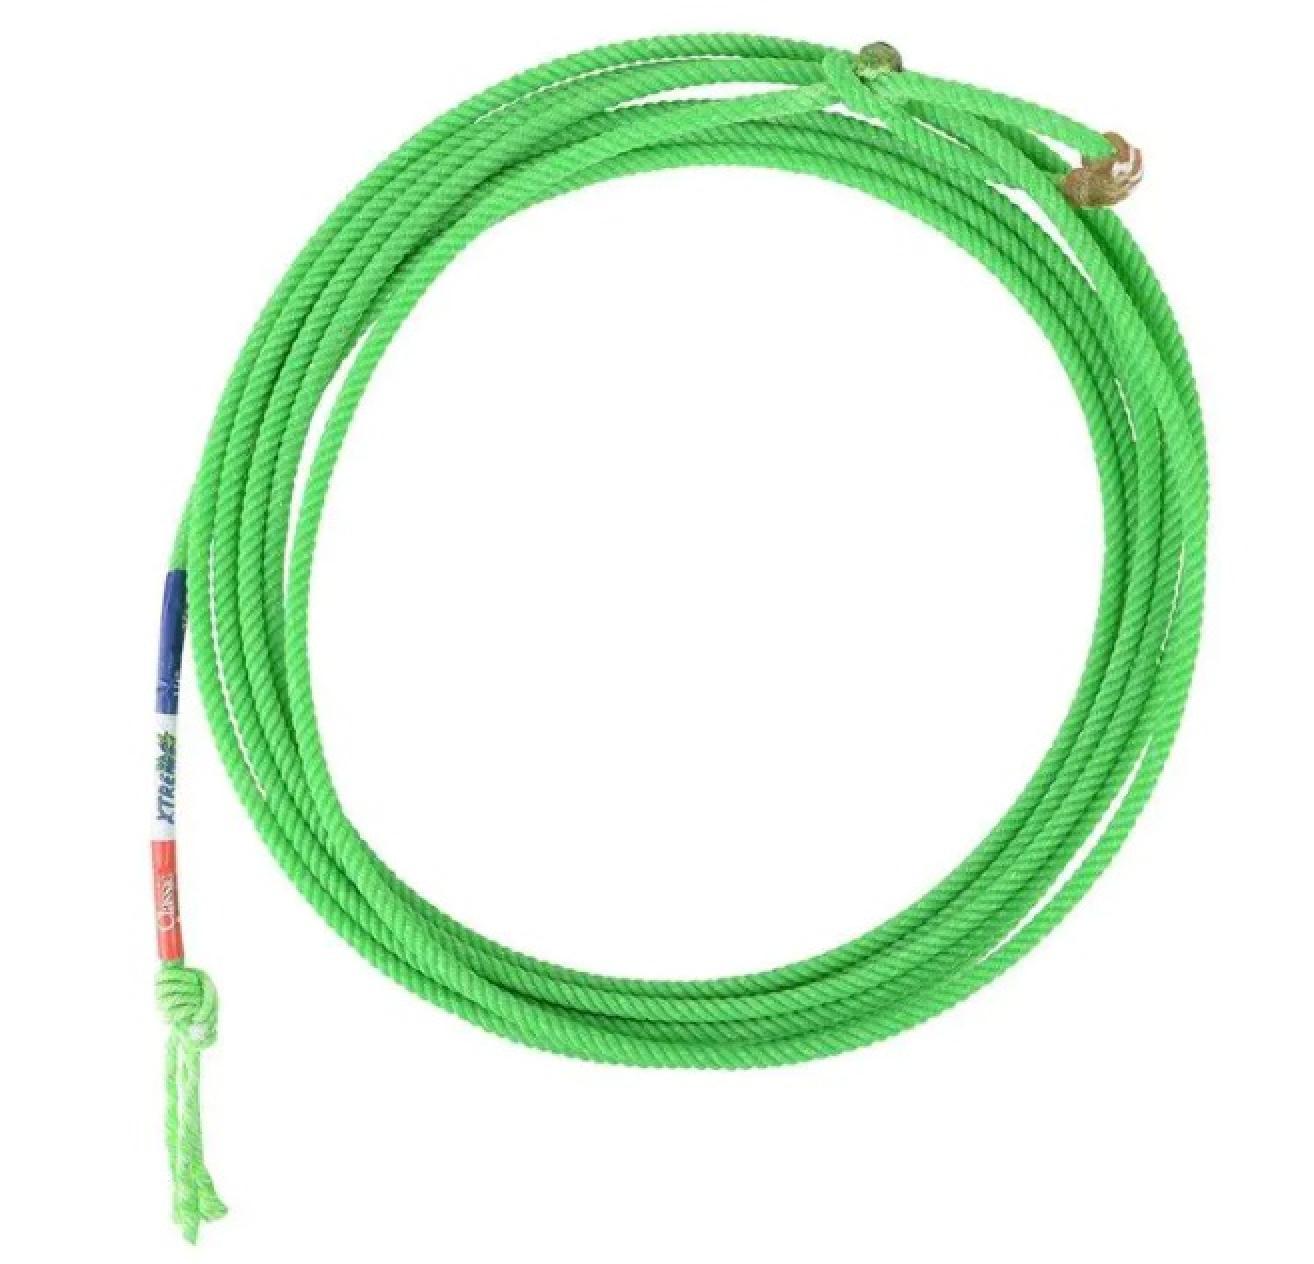 Equibrand Rattler Kids Rope Extreme 4 Strand Poly Green